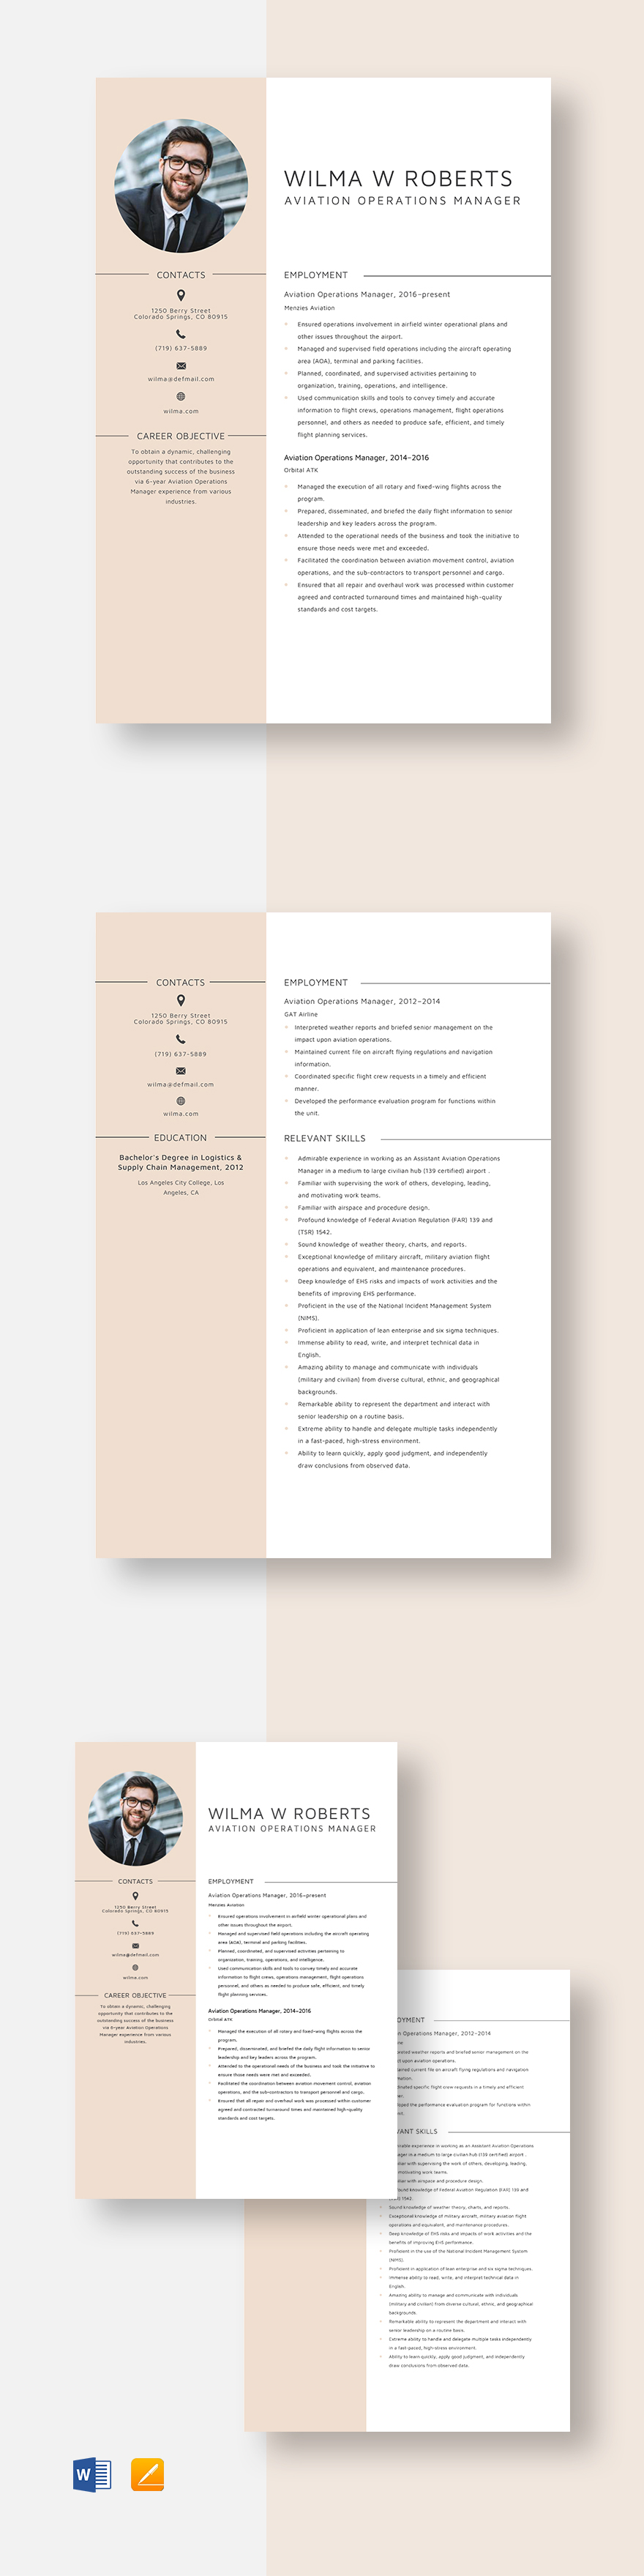 Free Aviation Operations Manager Resume Template